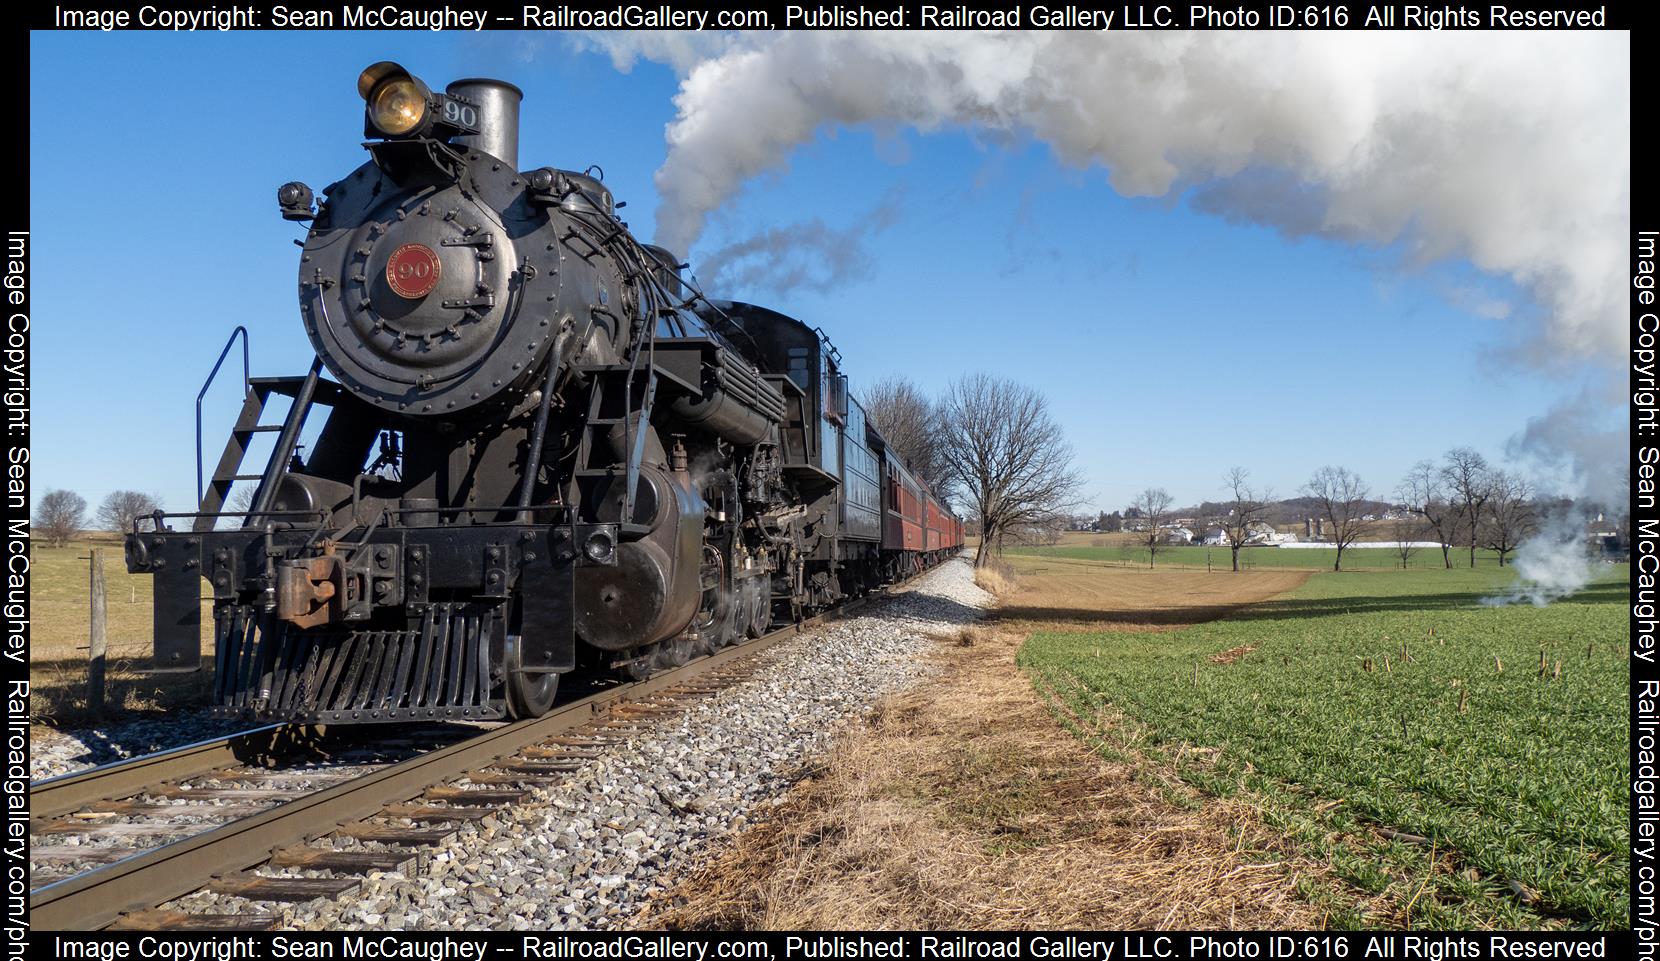 90 is a class 2-10-0 and  is pictured in Strasburg, Pennsylvania, United States.  This was taken along the Strasburg Rail Road on the Strasburg Rail Road. Photo Copyright: Sean McCaughey uploaded to Railroad Gallery on 01/23/2023. This photograph of 90 was taken on Tuesday, January 17, 2023. All Rights Reserved. 